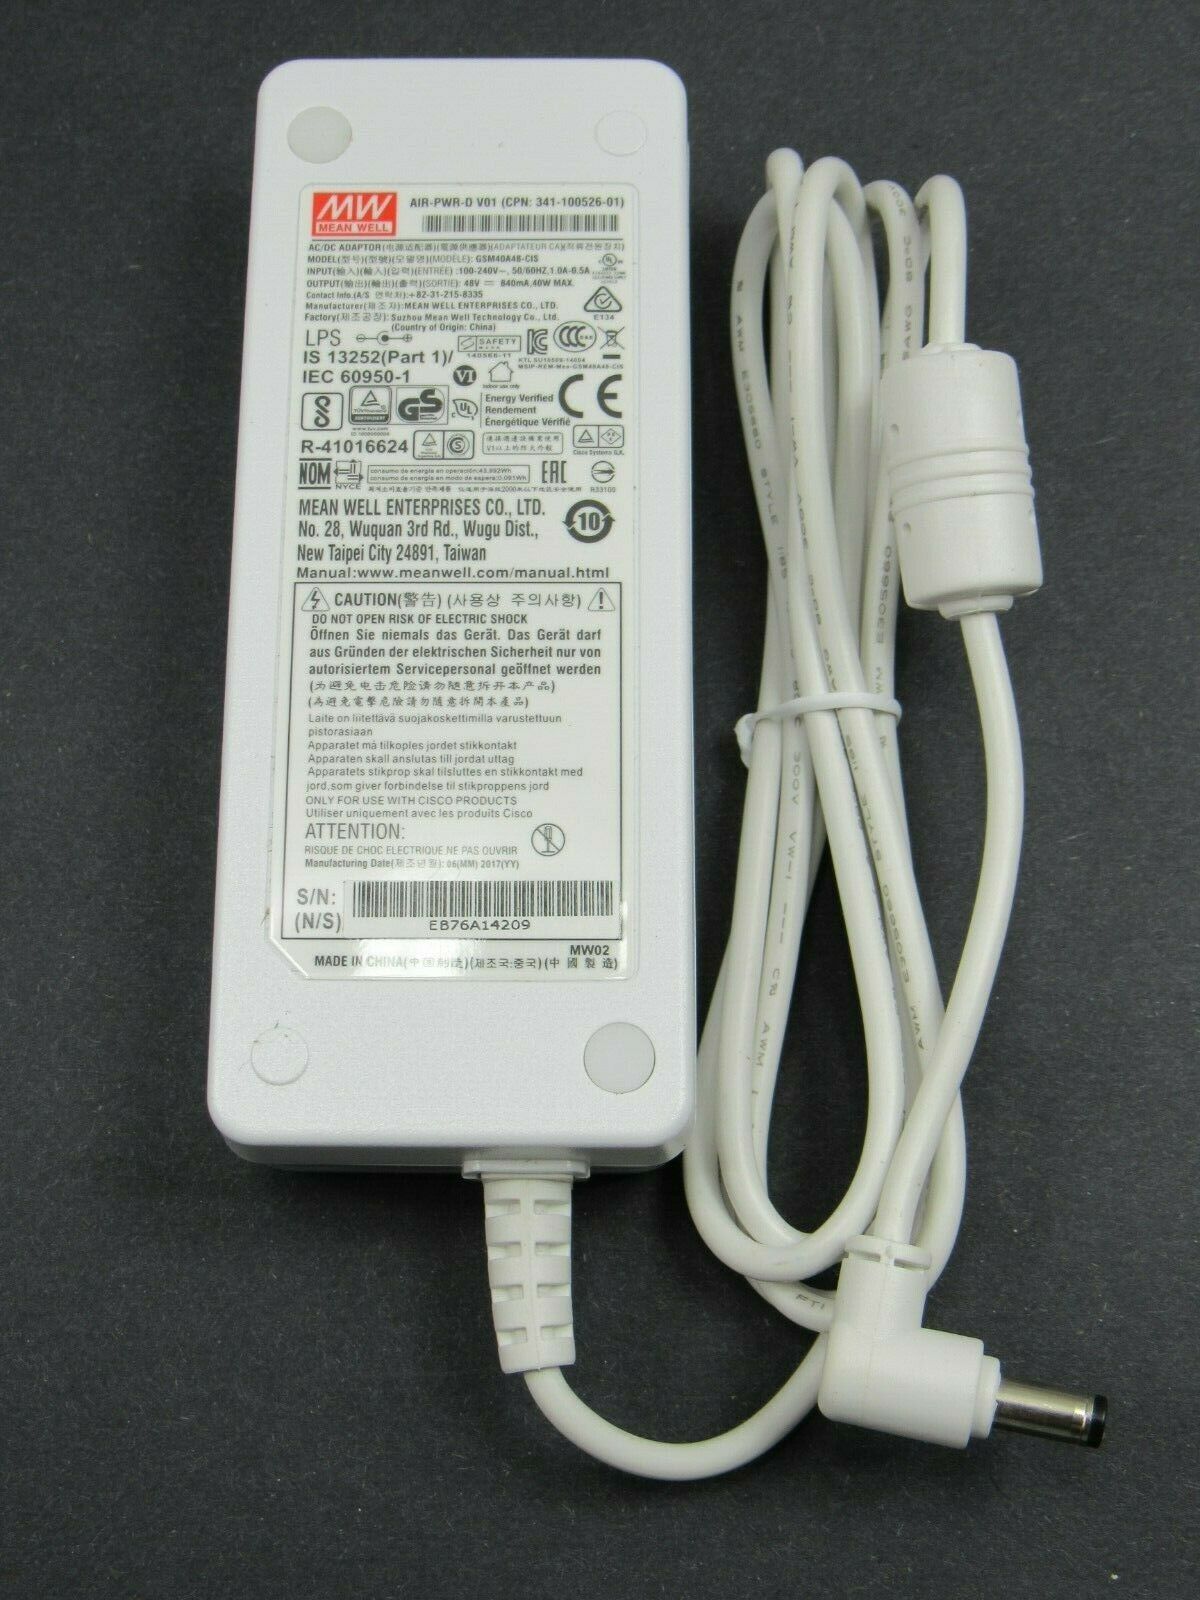 NEW MW Mean Well GSM40A48-CIS 48V 840mA AC DC Adapter Air-PWR-D V01 CPN: 341-100526-01